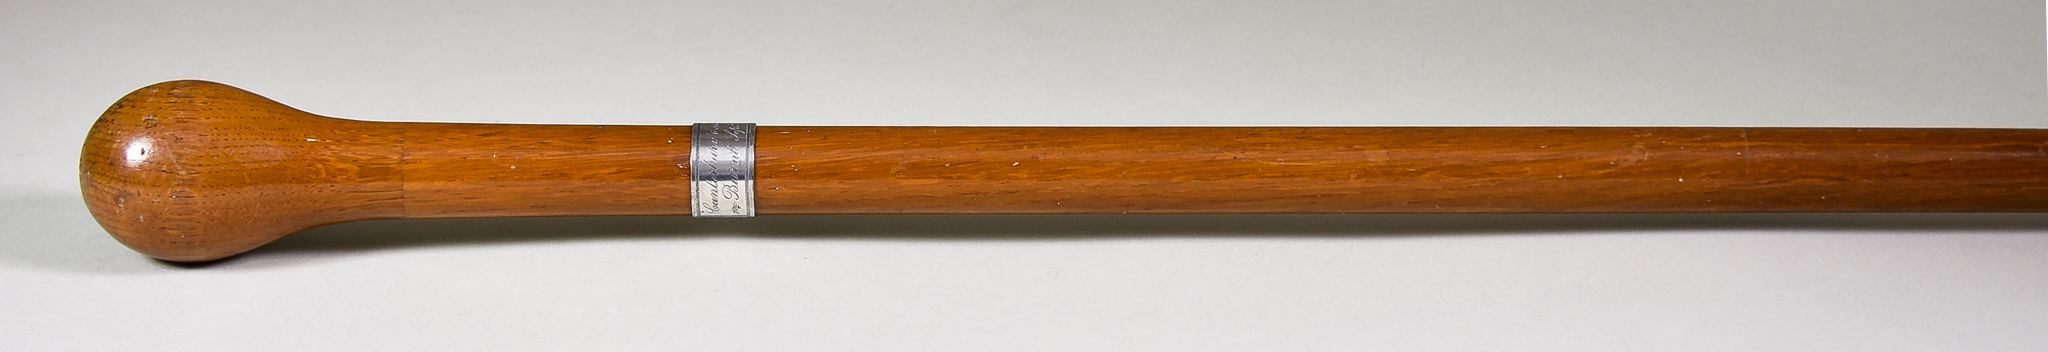 An Oak Walking Cane with Plain Handle and Engraved Silver Ferrule, worded -"Canterbury Cathedral